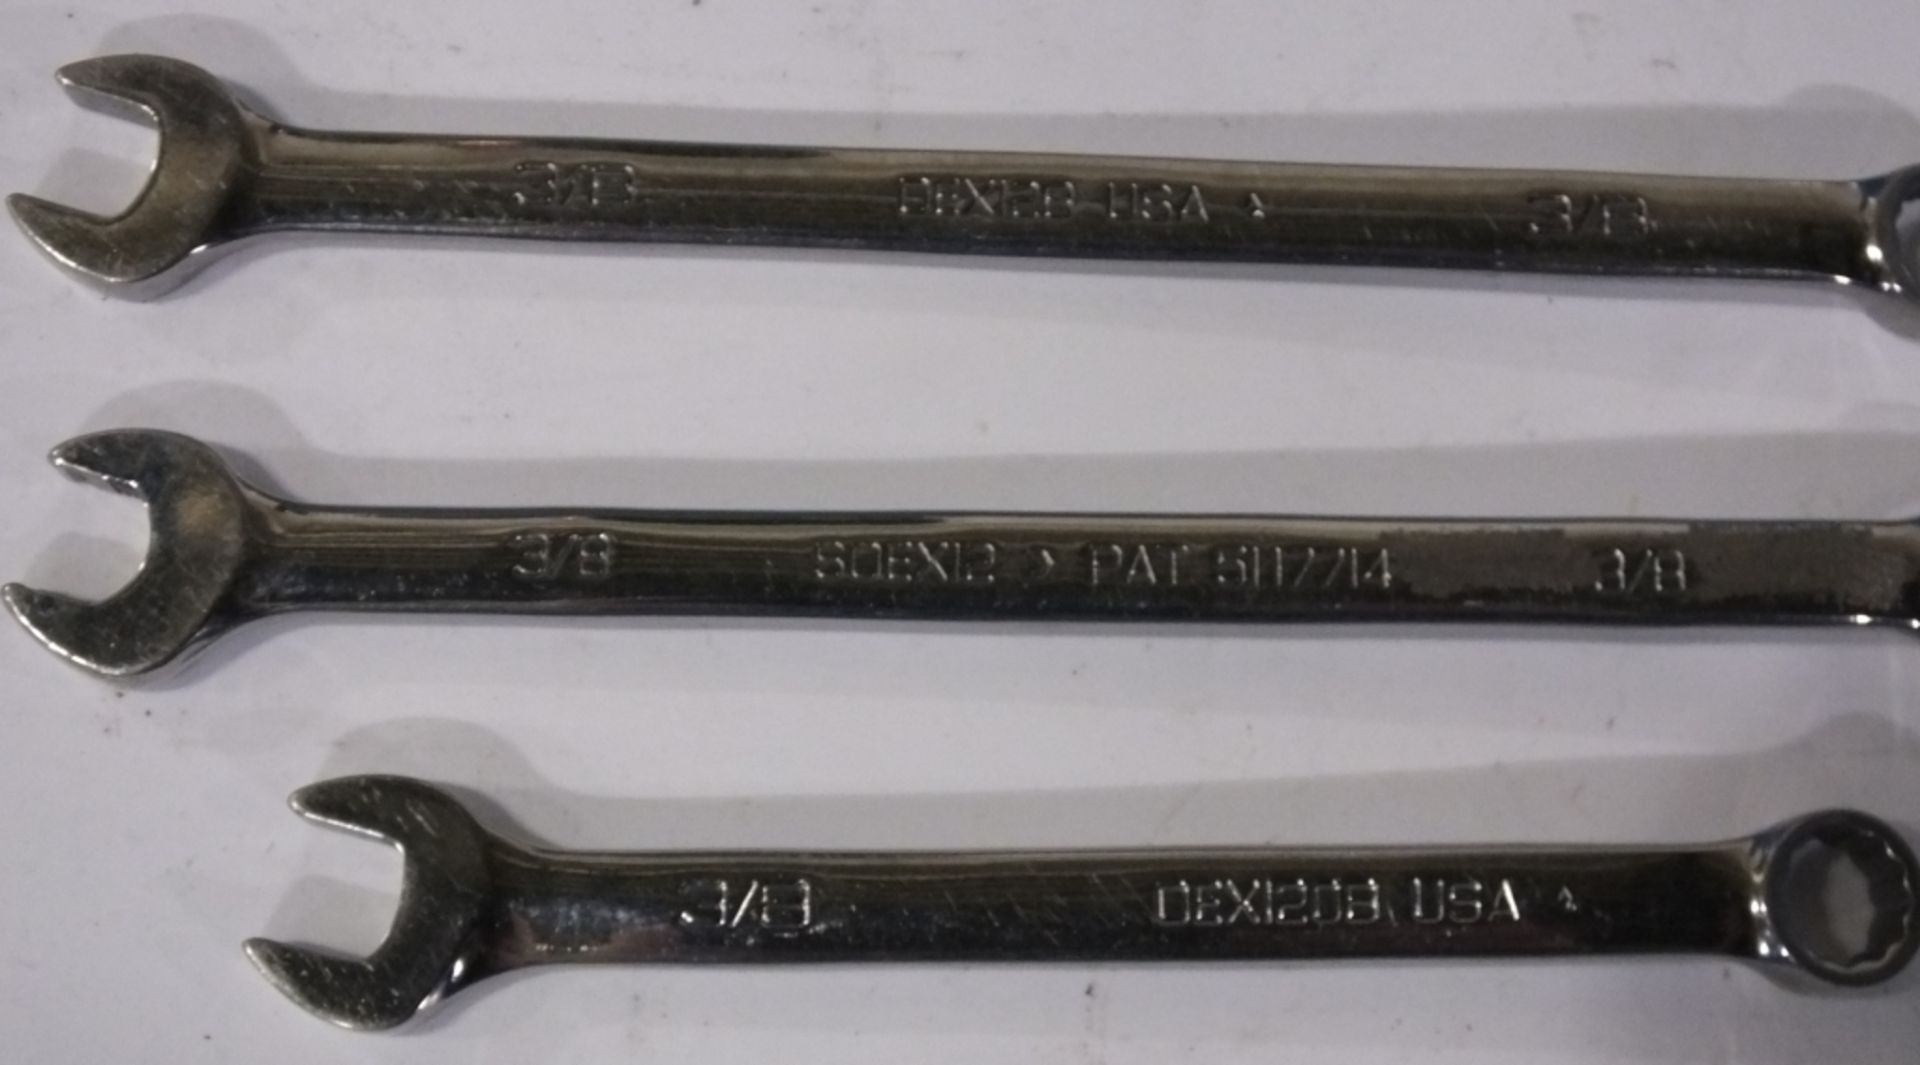 3x Snap-On combination spanners - 3/8 - Image 3 of 3